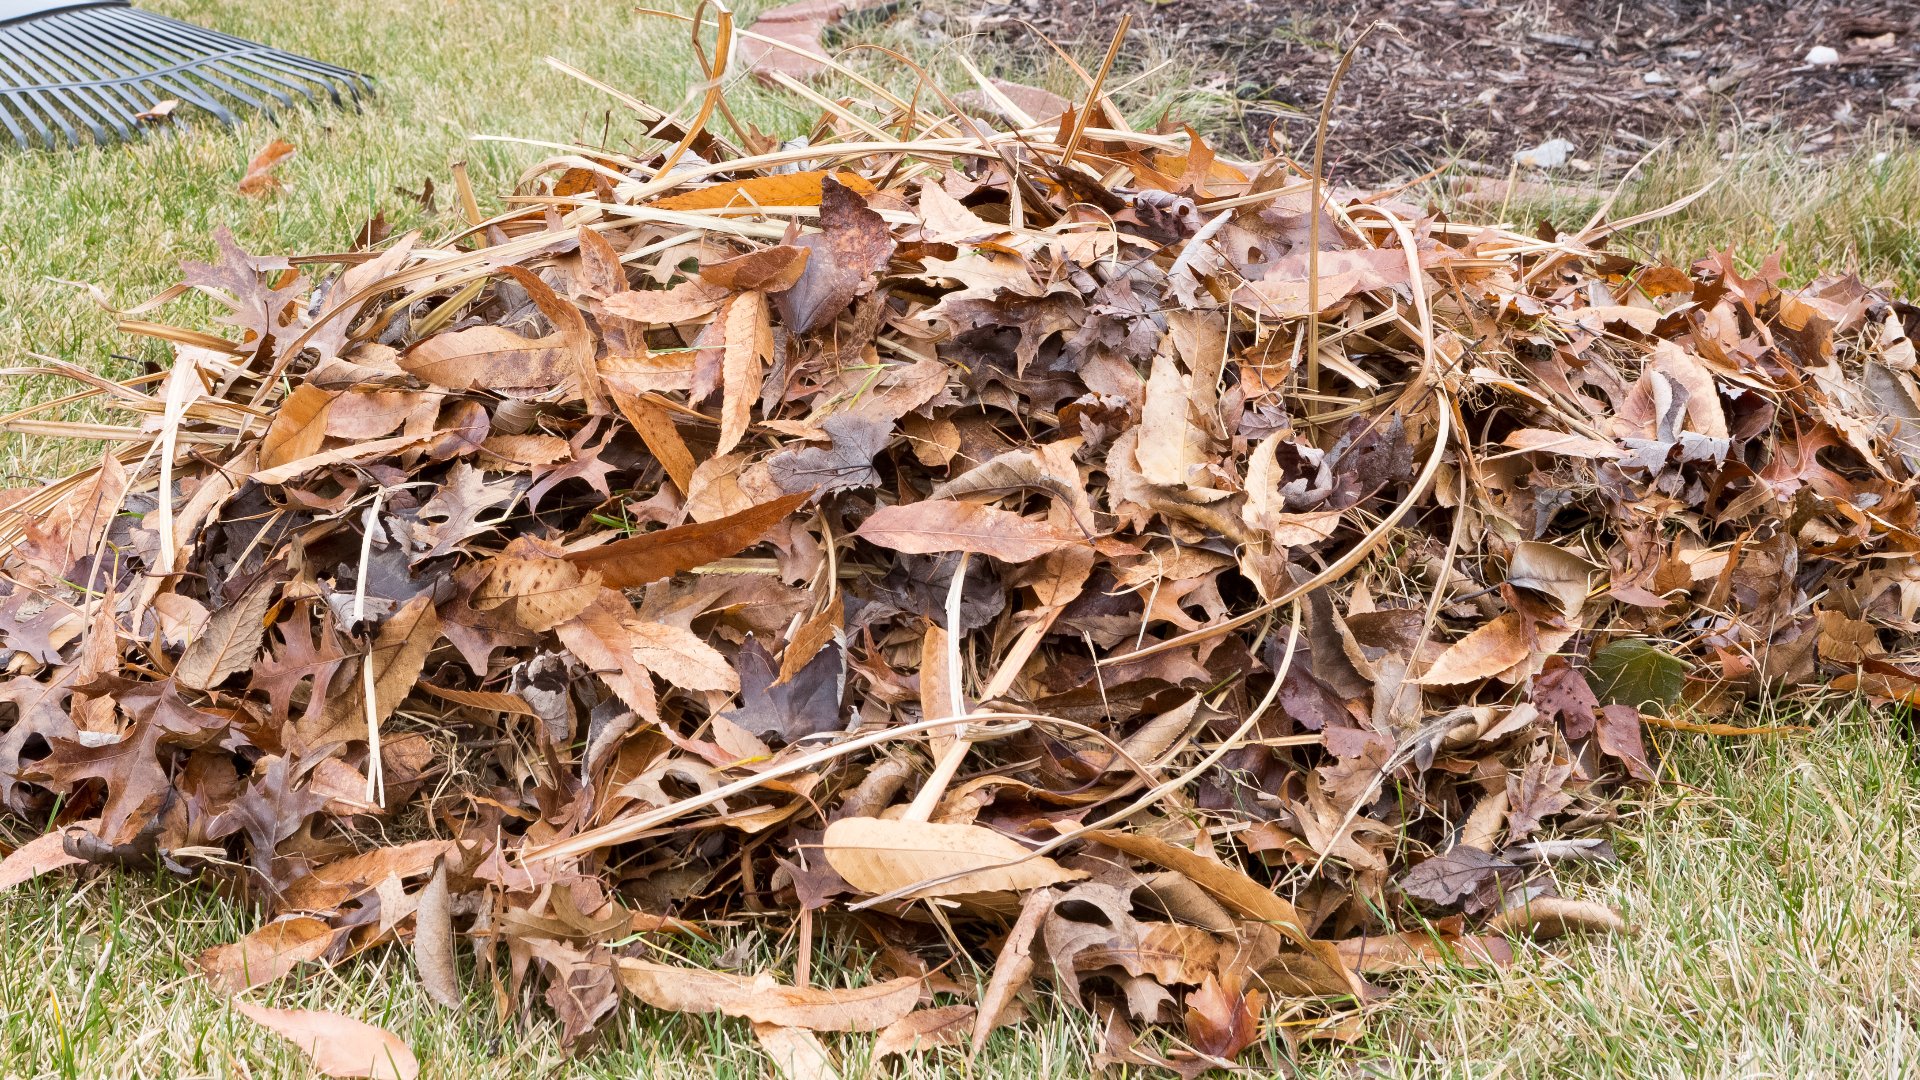 Cleaning Up Your Yard Is More Than Just for Looks - It Improves Lawn Health